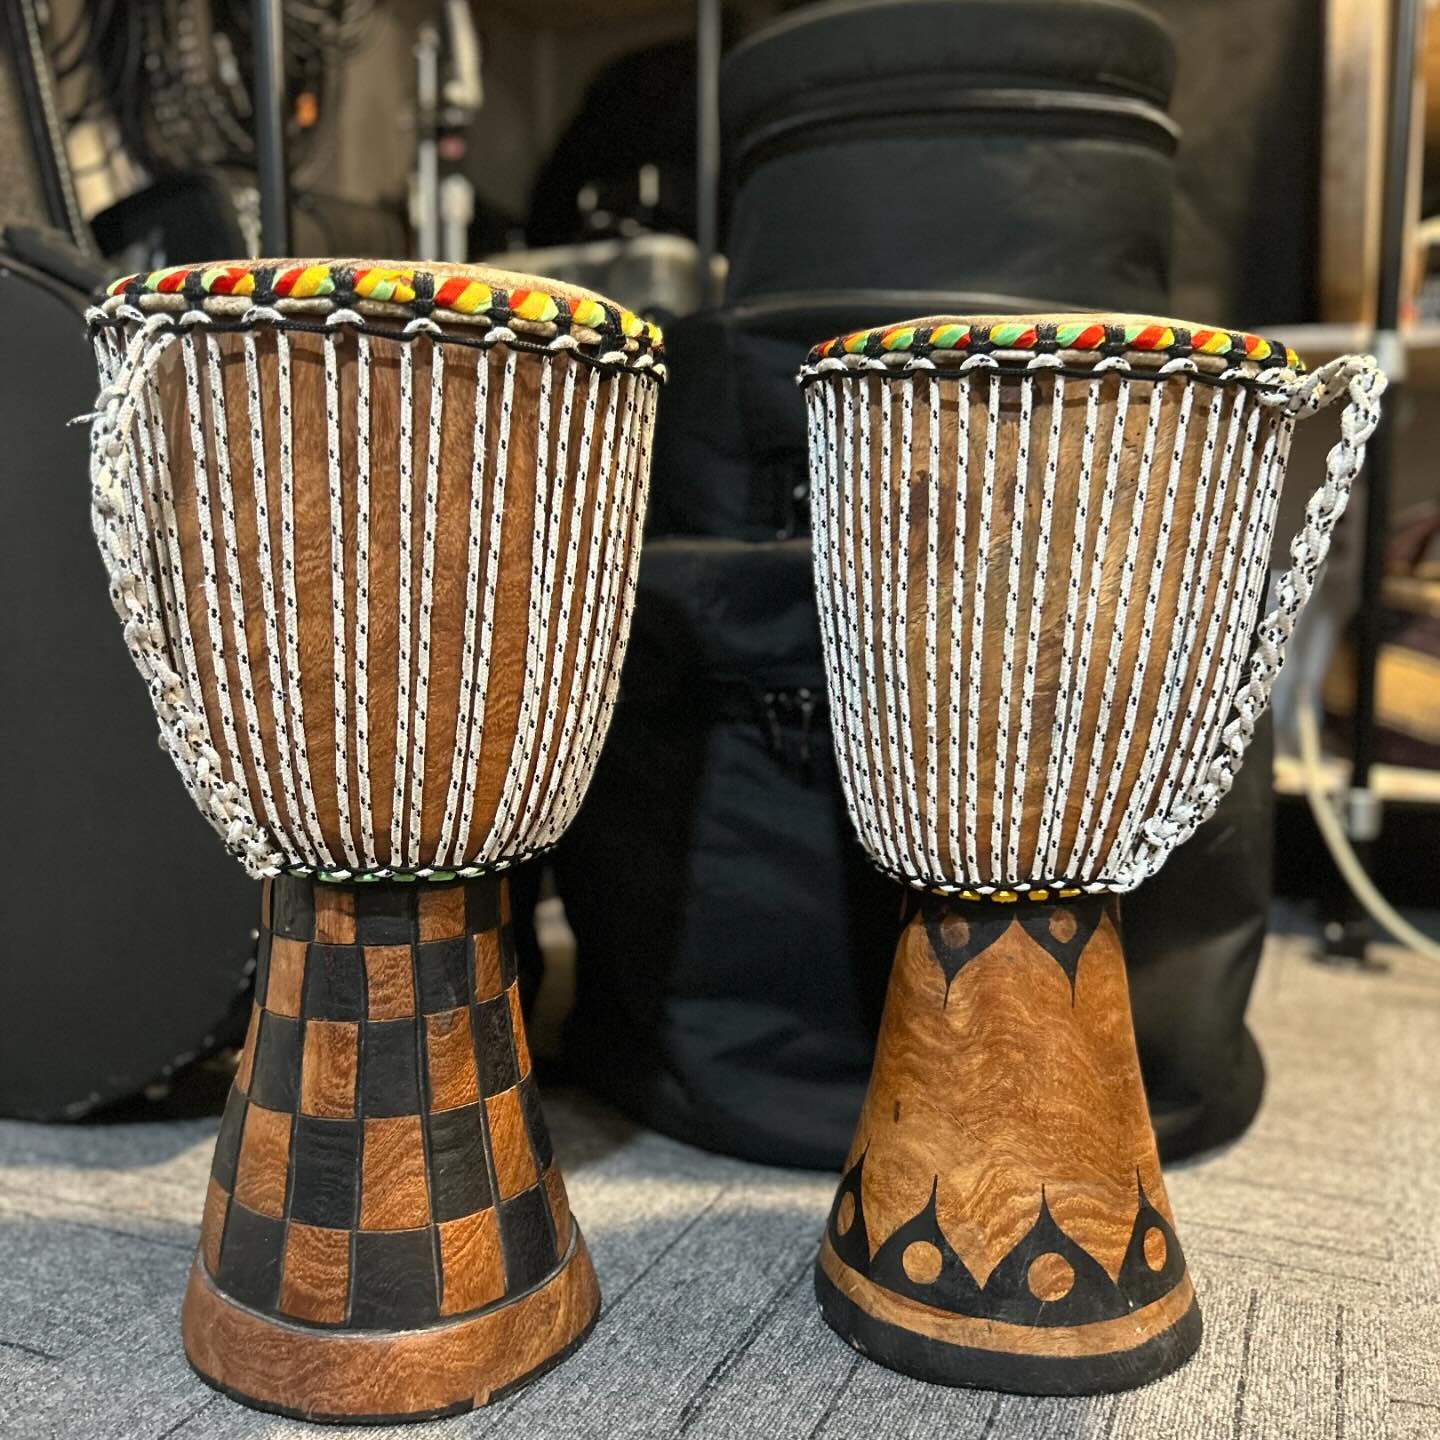 May drum circle series prize preview #1
Limited Empowered tees and gorgeous djembes!! Join us every Friday in May 6:30-7:30. Sign up at empoweredmusicpa.com 🥳